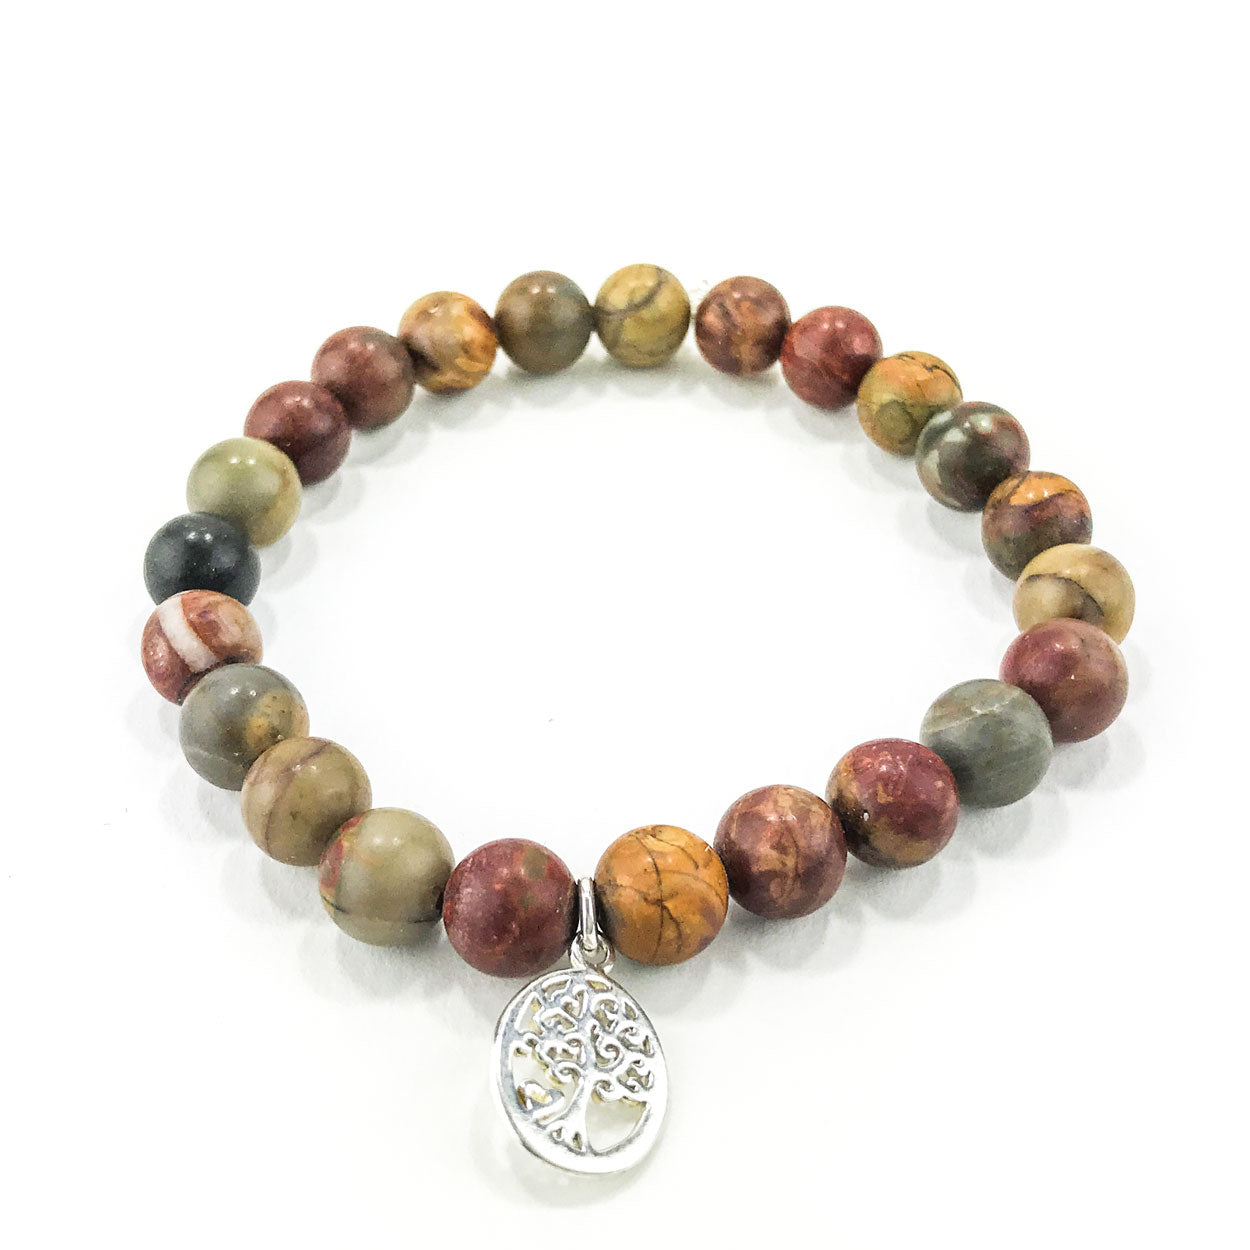 Stone Bracelet - Picasso Jasper with Tree of Life in Circle Charm